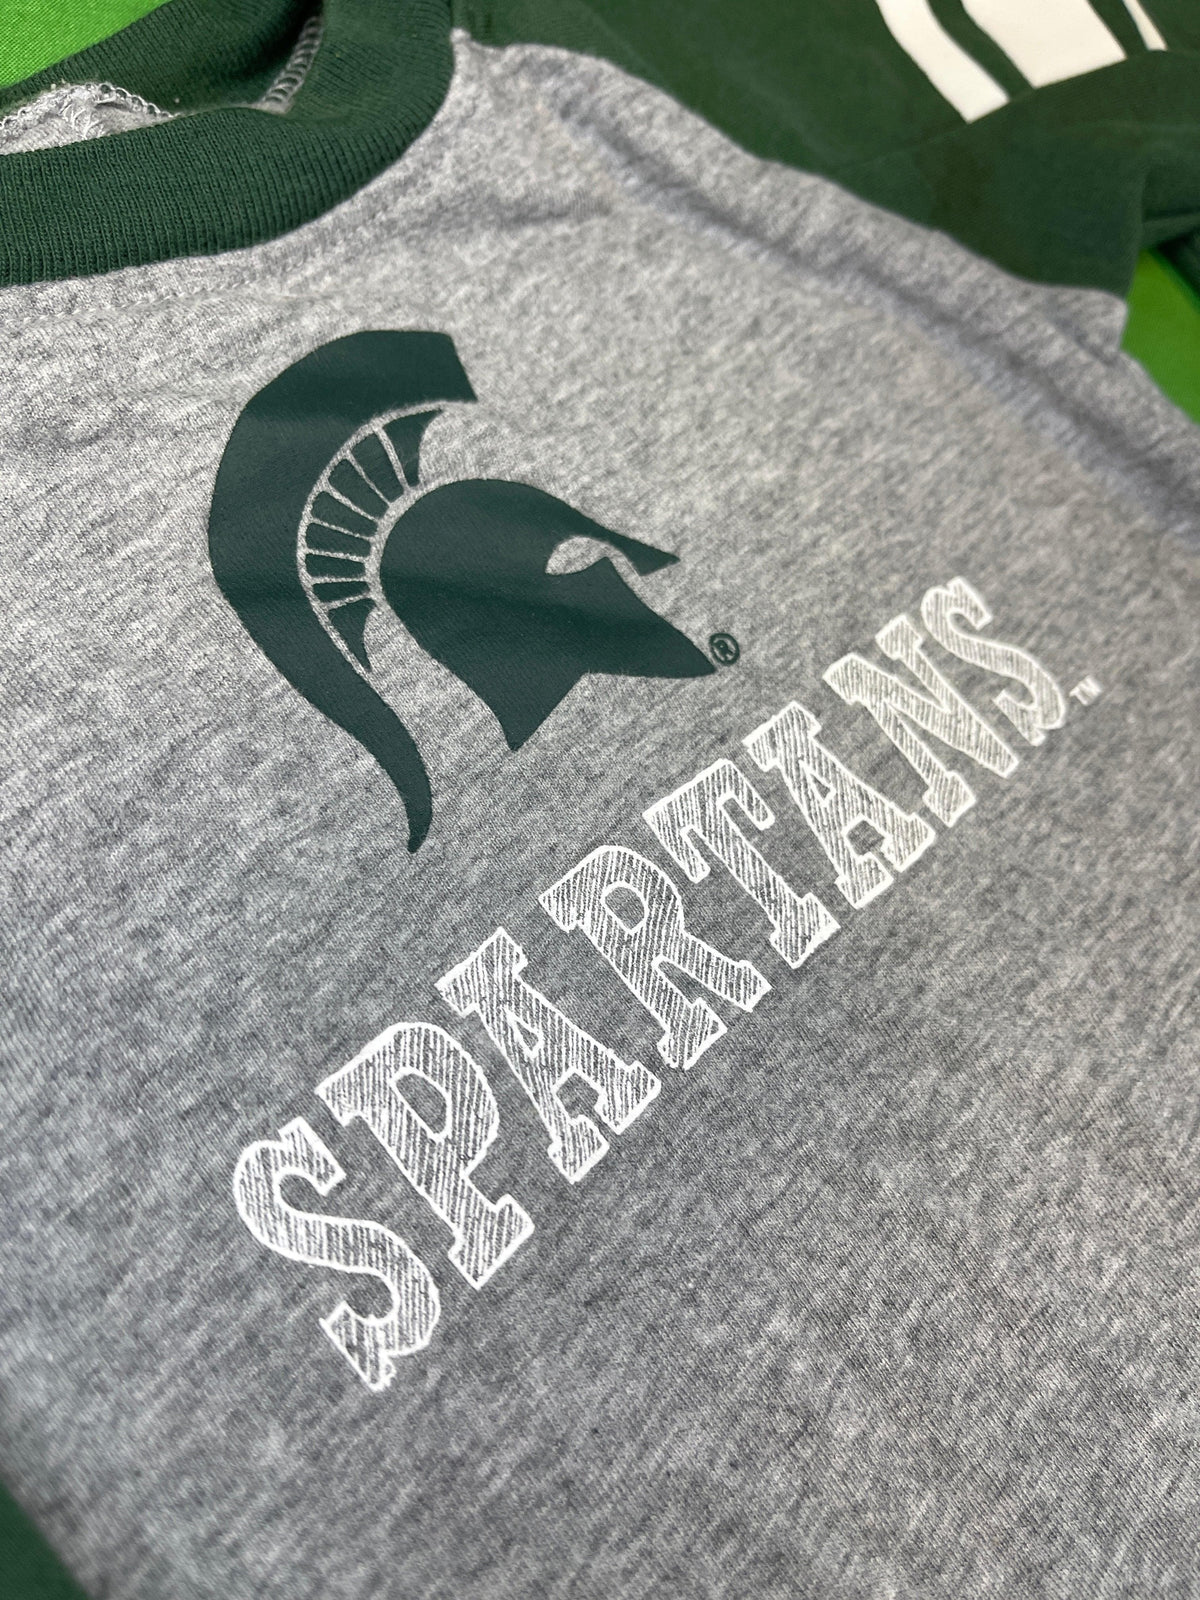 NCAA Michigan State Spartans 2-piece Outfit Baby Infant 6-9 months